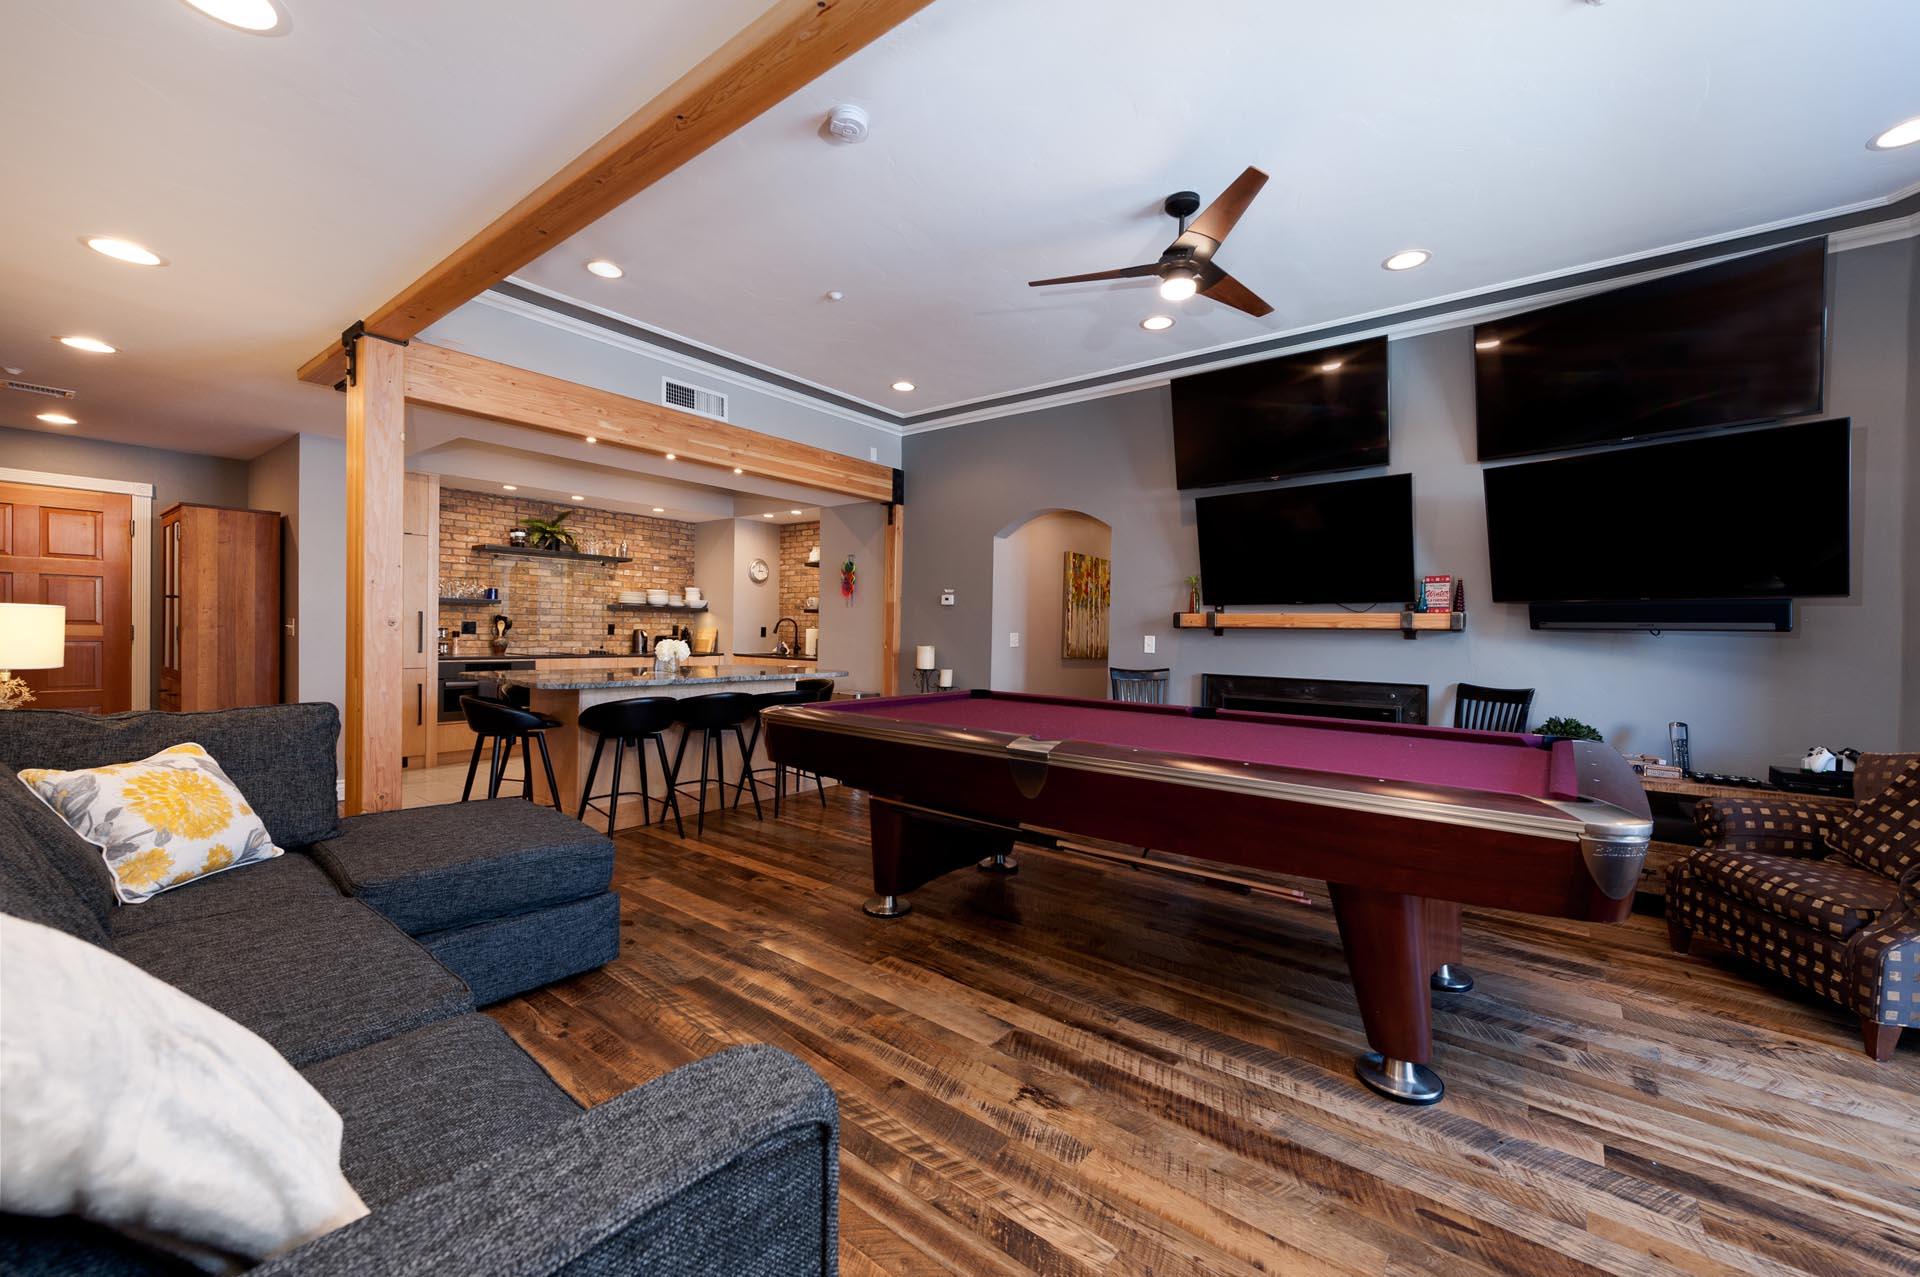 Main Living Space - Pool Table, 4 TVS and gas fireplace